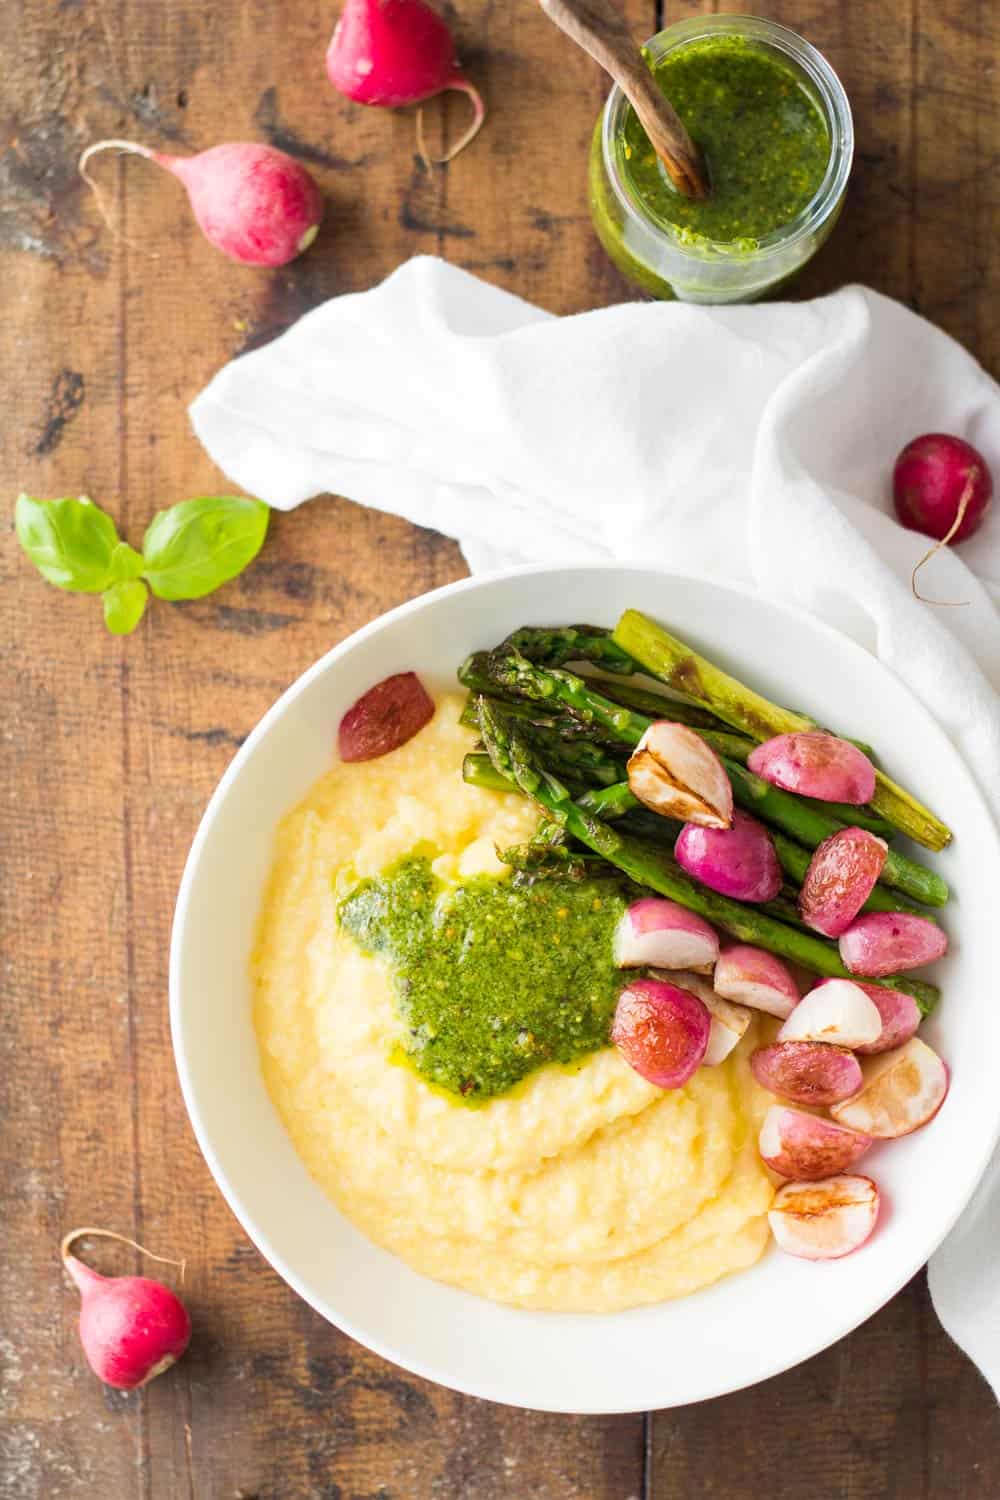 Top view of Creamy Parmesan Polenta with Grilled Vegetables and 5-Minute Basil Pistachio Pesto, an open jar of pesto sauce, and a white napkin.